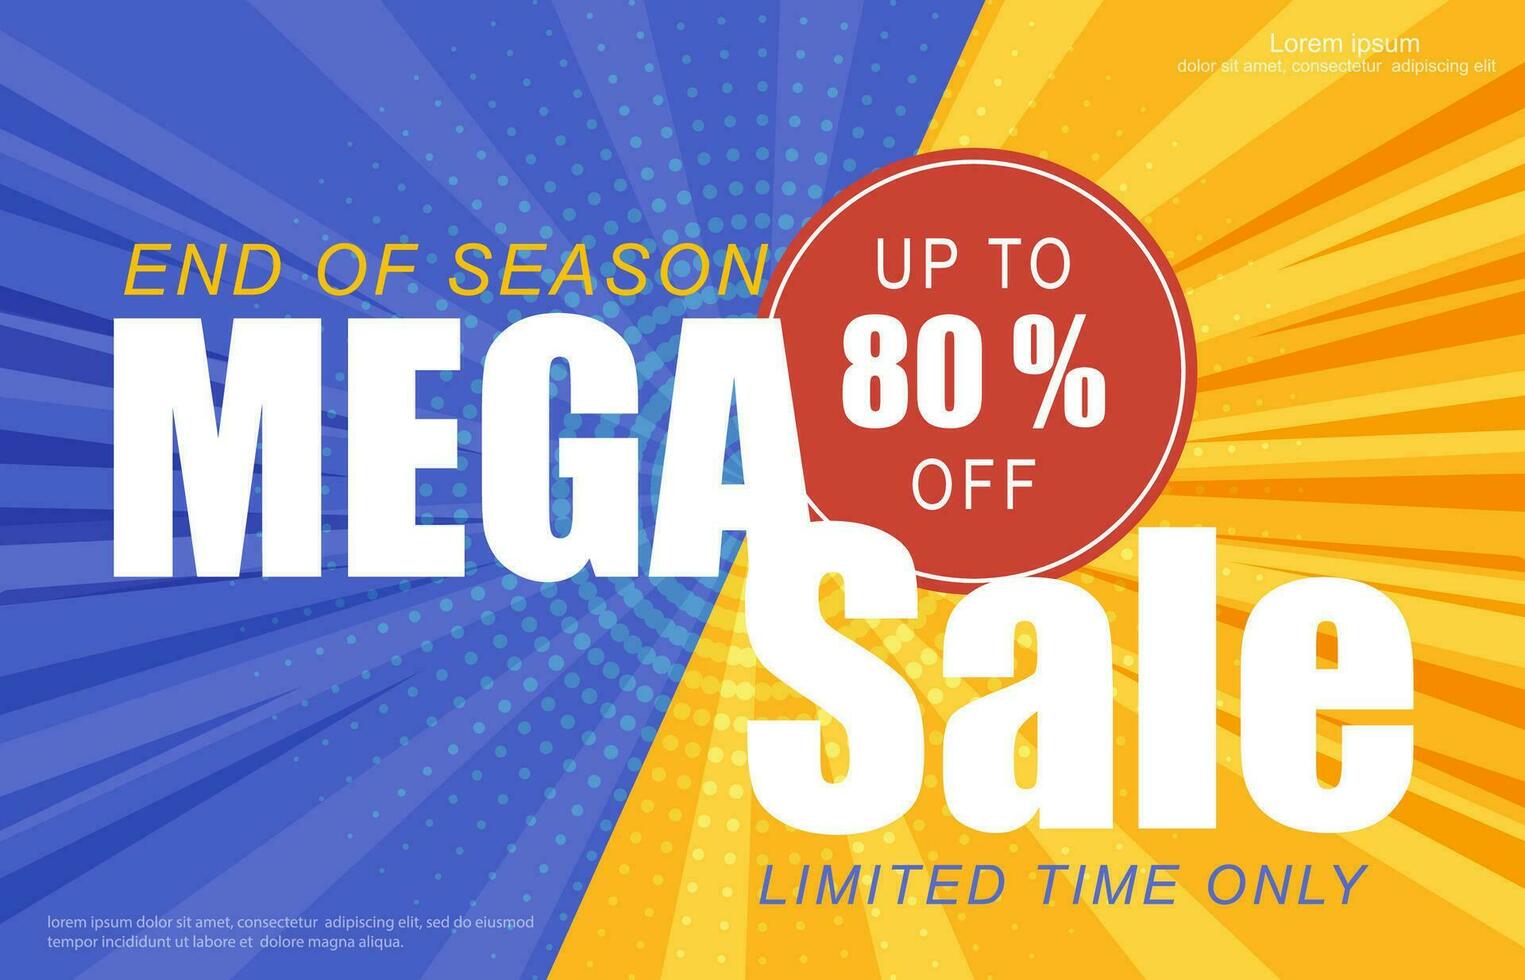 Sale banner template design with comic background. Mega sale special up to 80 percent off. End of season special offer banner. Vector illustration.